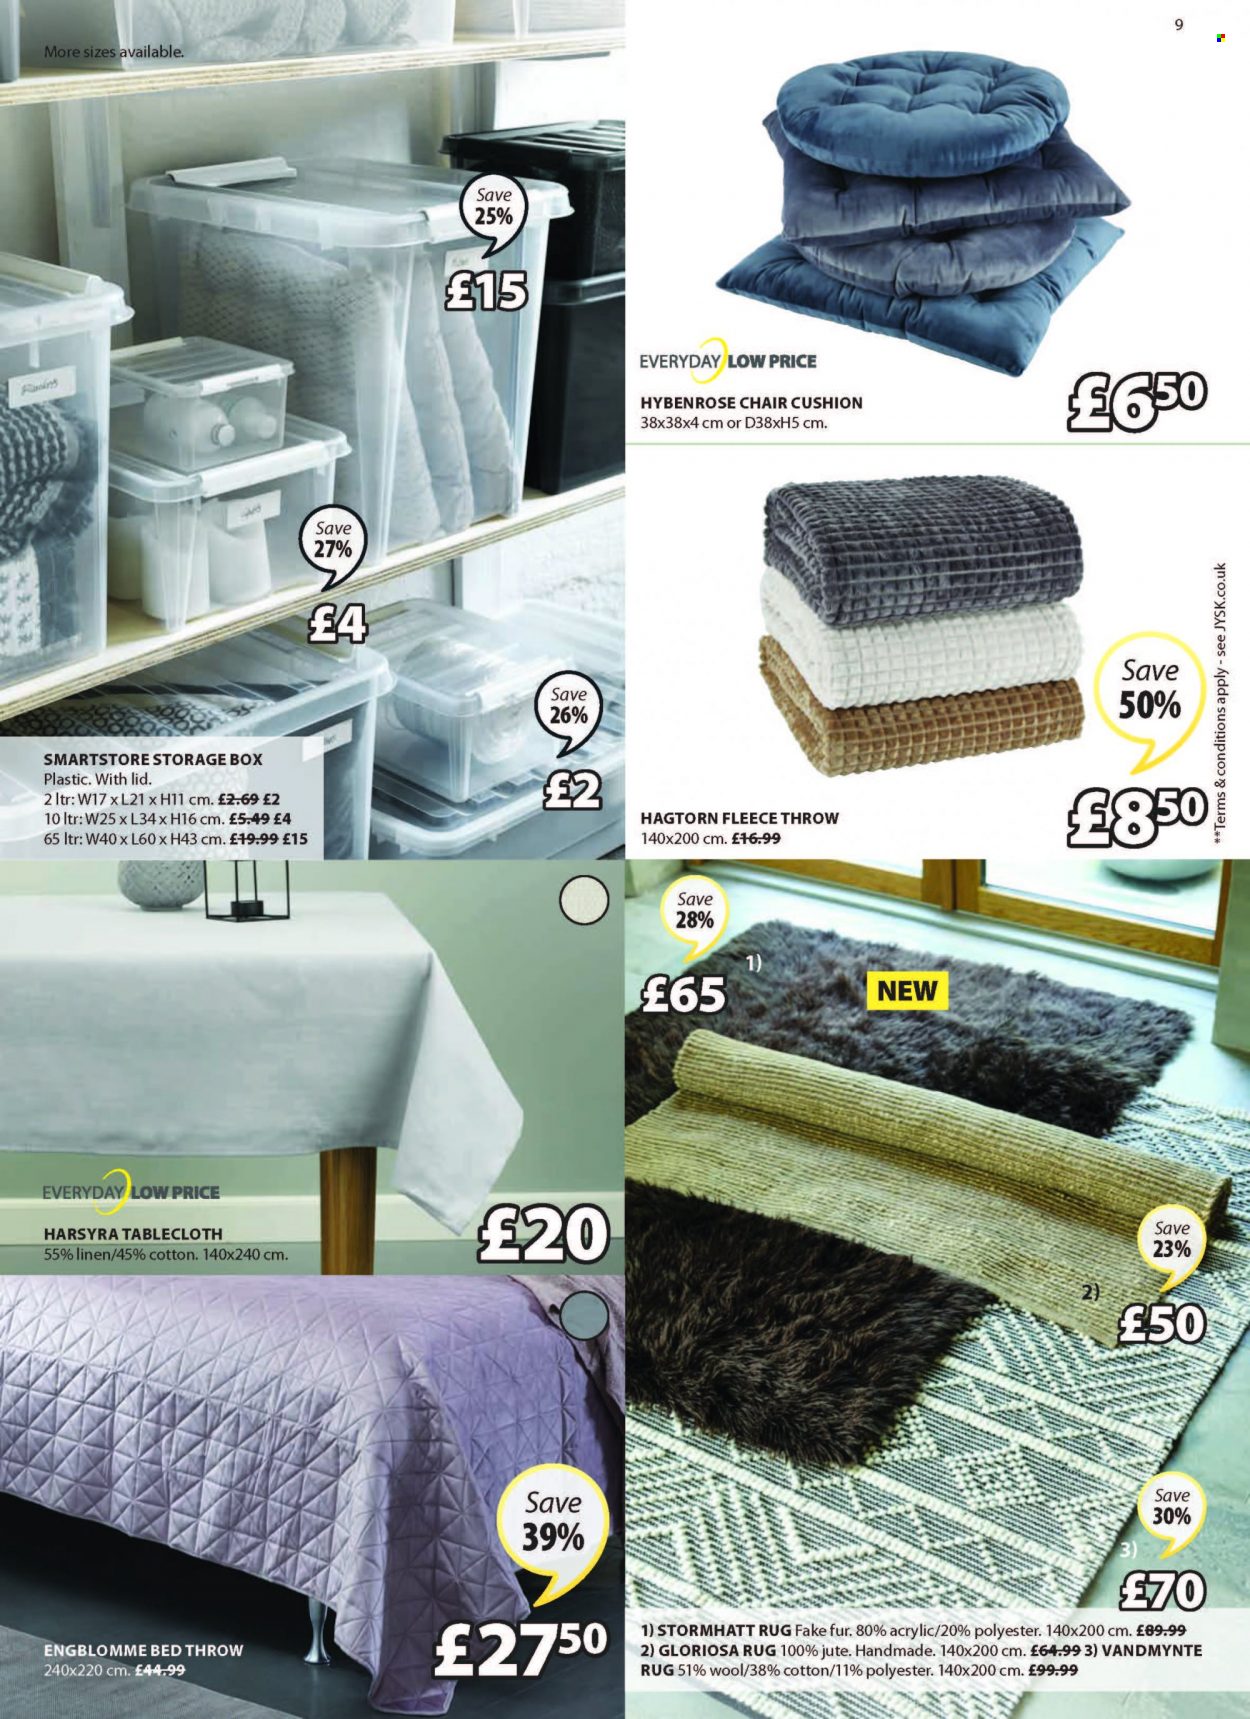 thumbnail - JYSK offer  - 09/09/2021 - 22/09/2021 - Sales products - storage box, chair, cushion, tablecloth, linens, fleece throw, rug. Page 9.